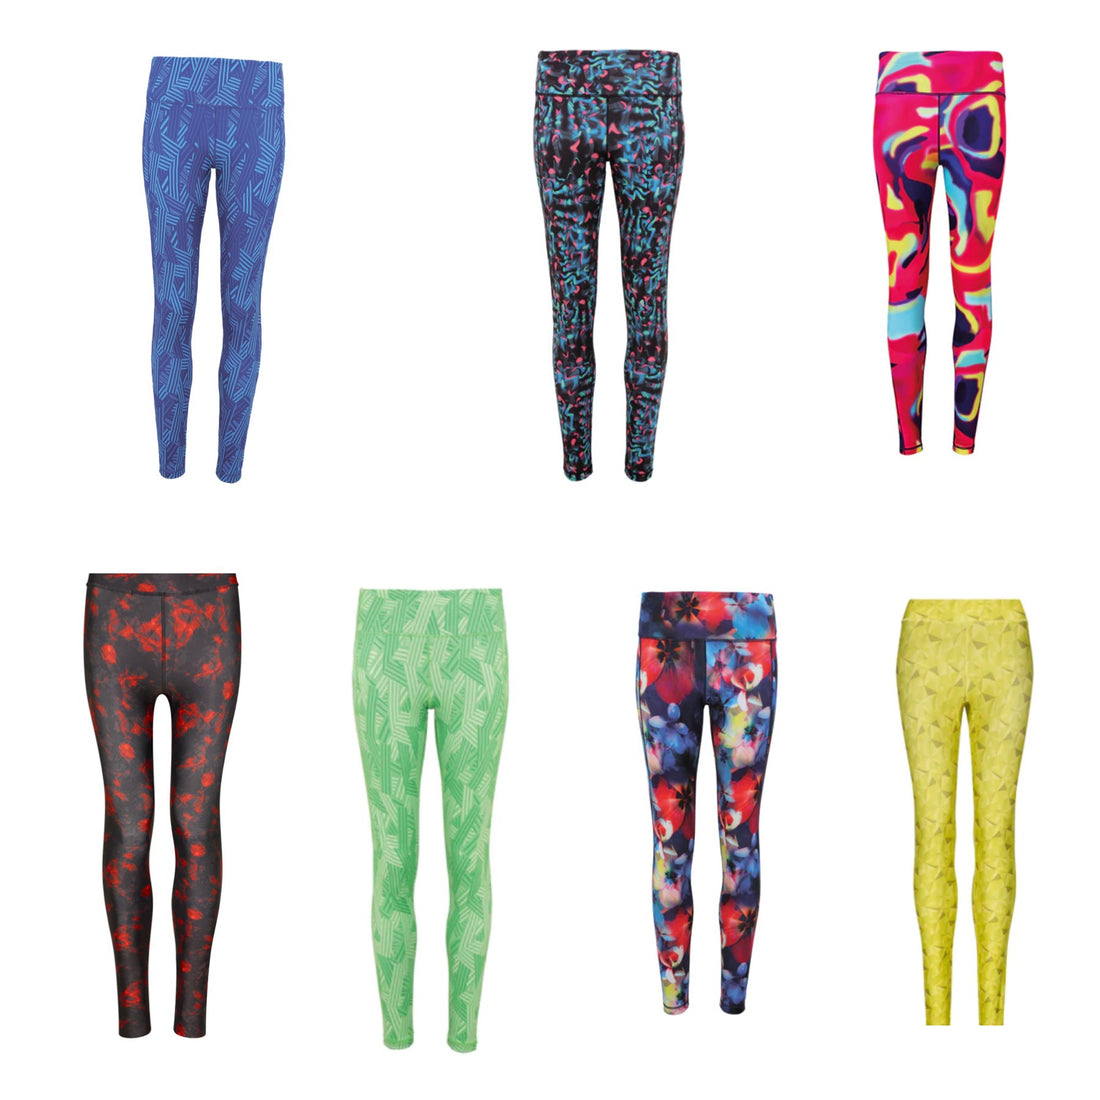 Make a Fashion Statement With Women's Leggings